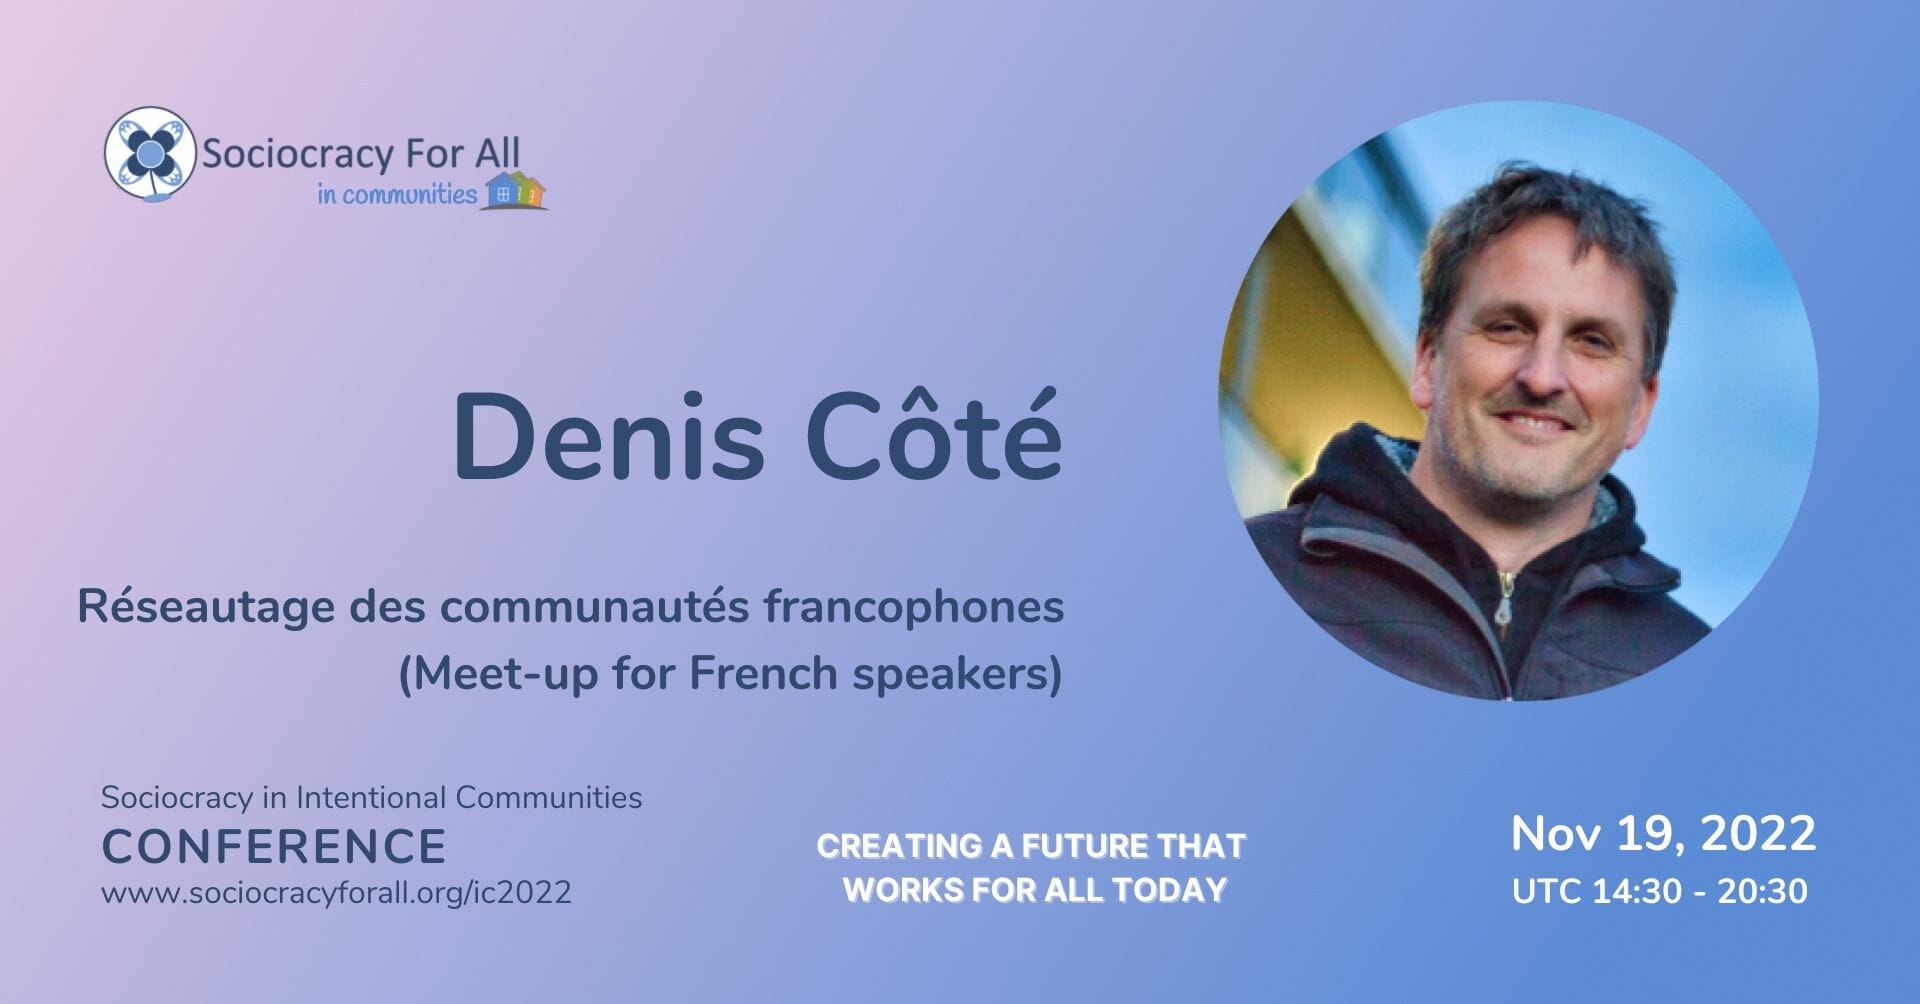 denis cote sociocracy in intentional communities conference 2022 - - Sociocracy For All